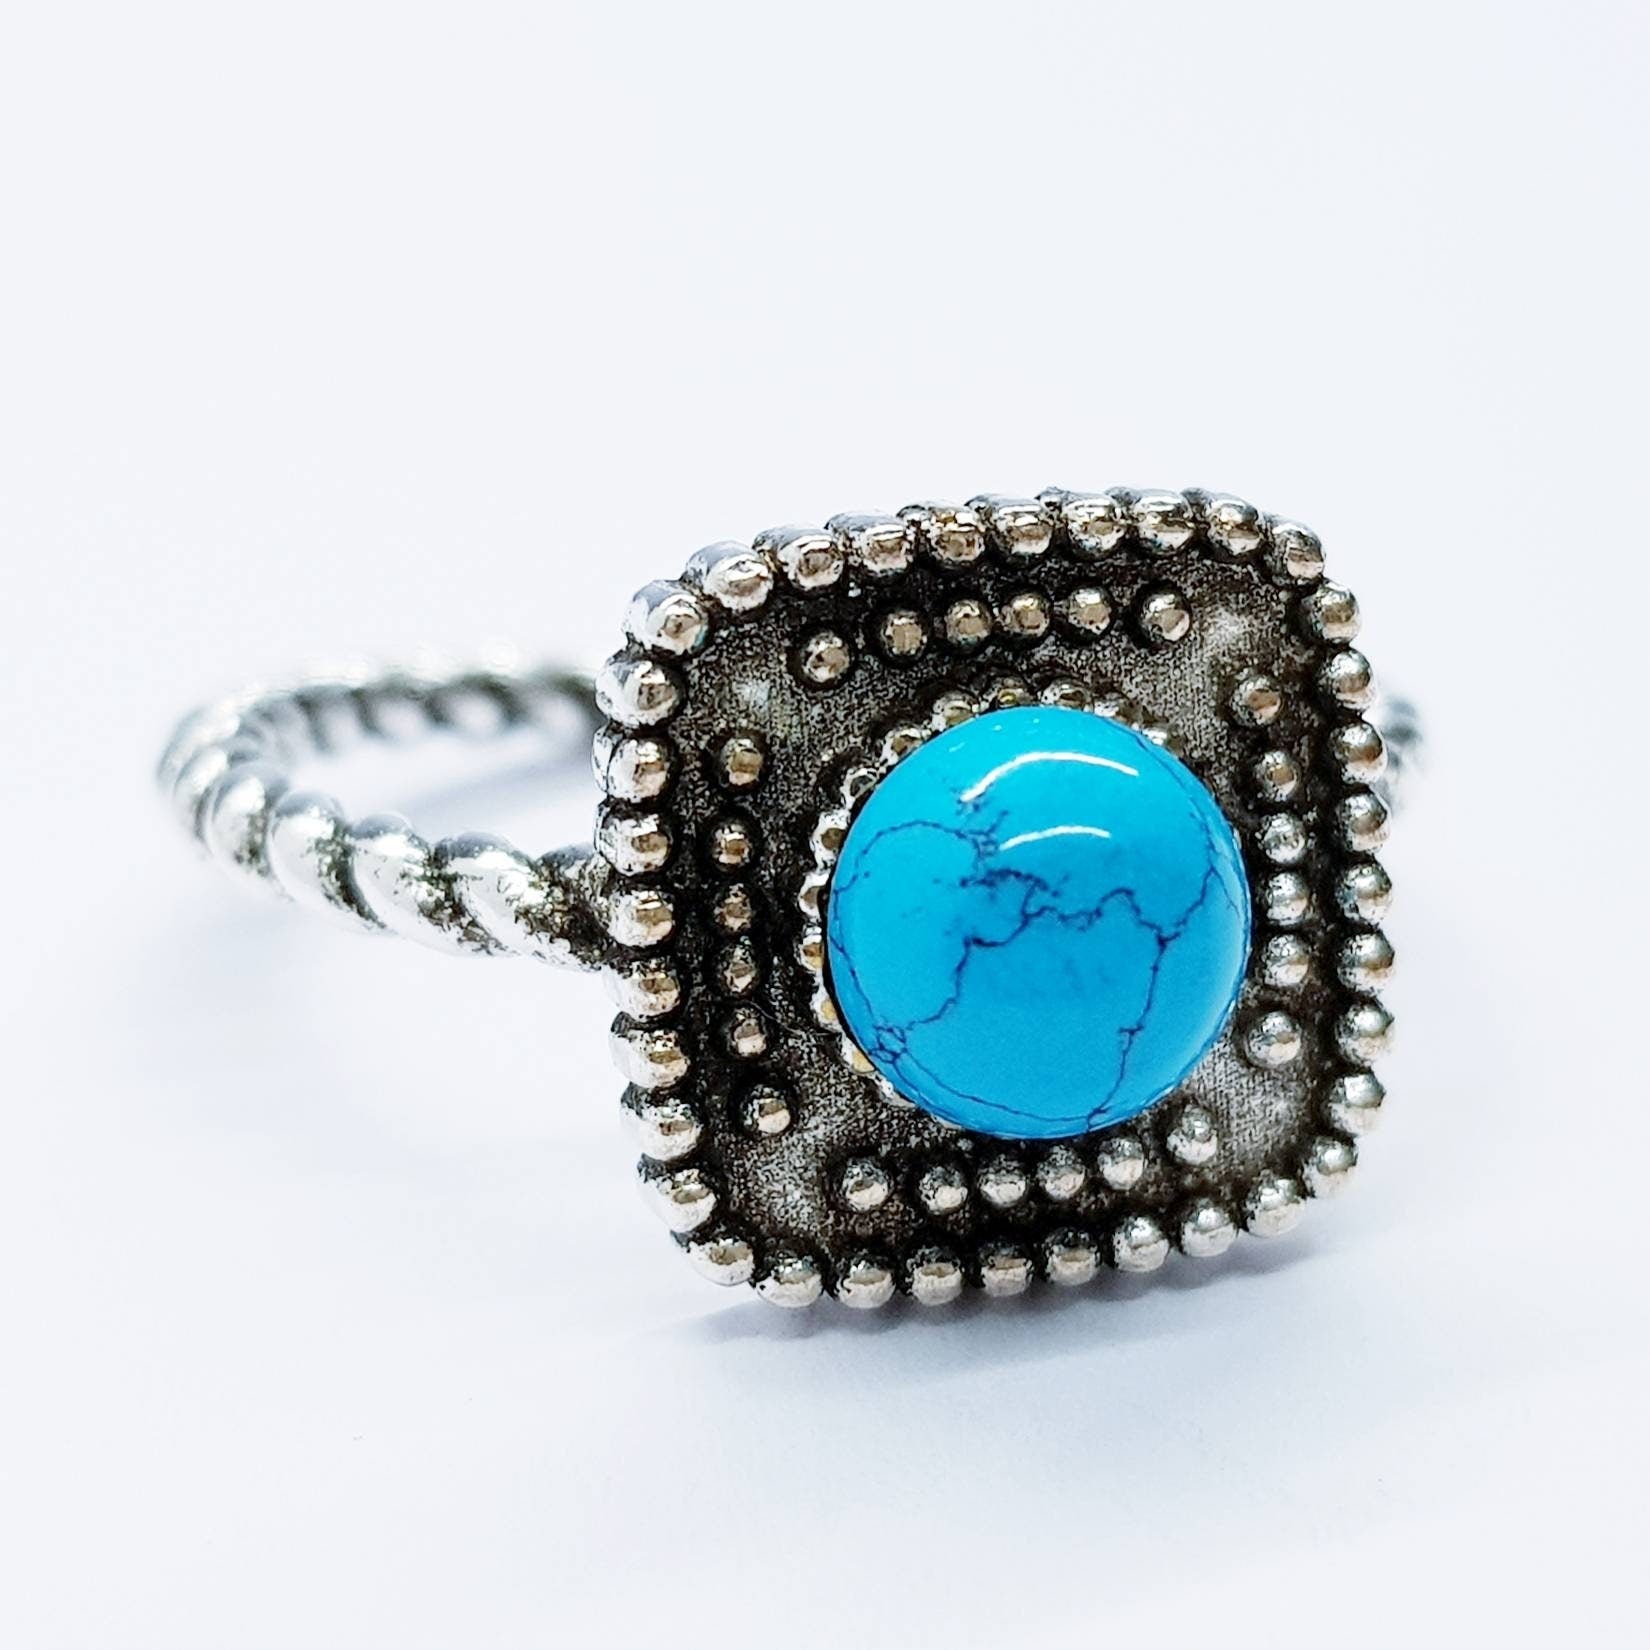 Turquoise boho Ring, silver turquoise ring, adjustable ring, gift for her